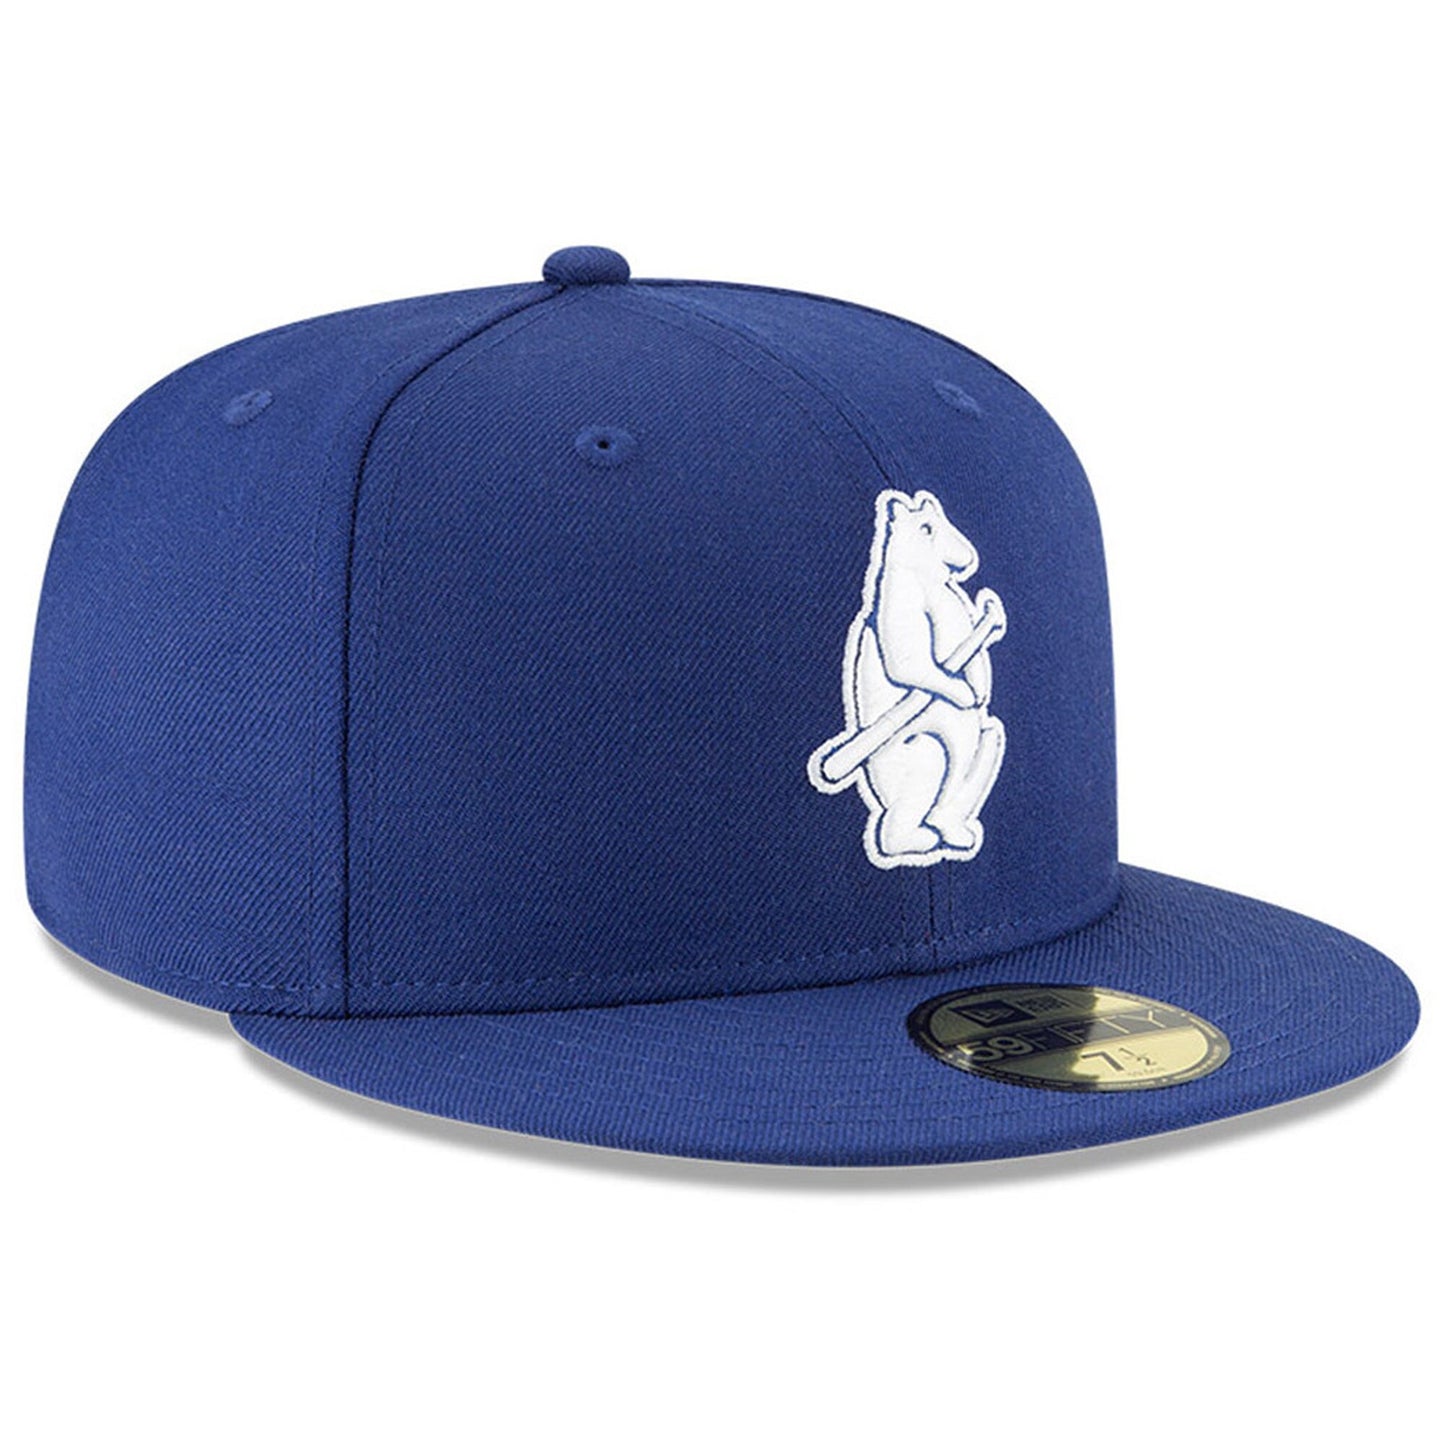 Men's Chicago Cubs New Era Royal Cooperstown 1914 Logo 59FIFTY Fitted Hat